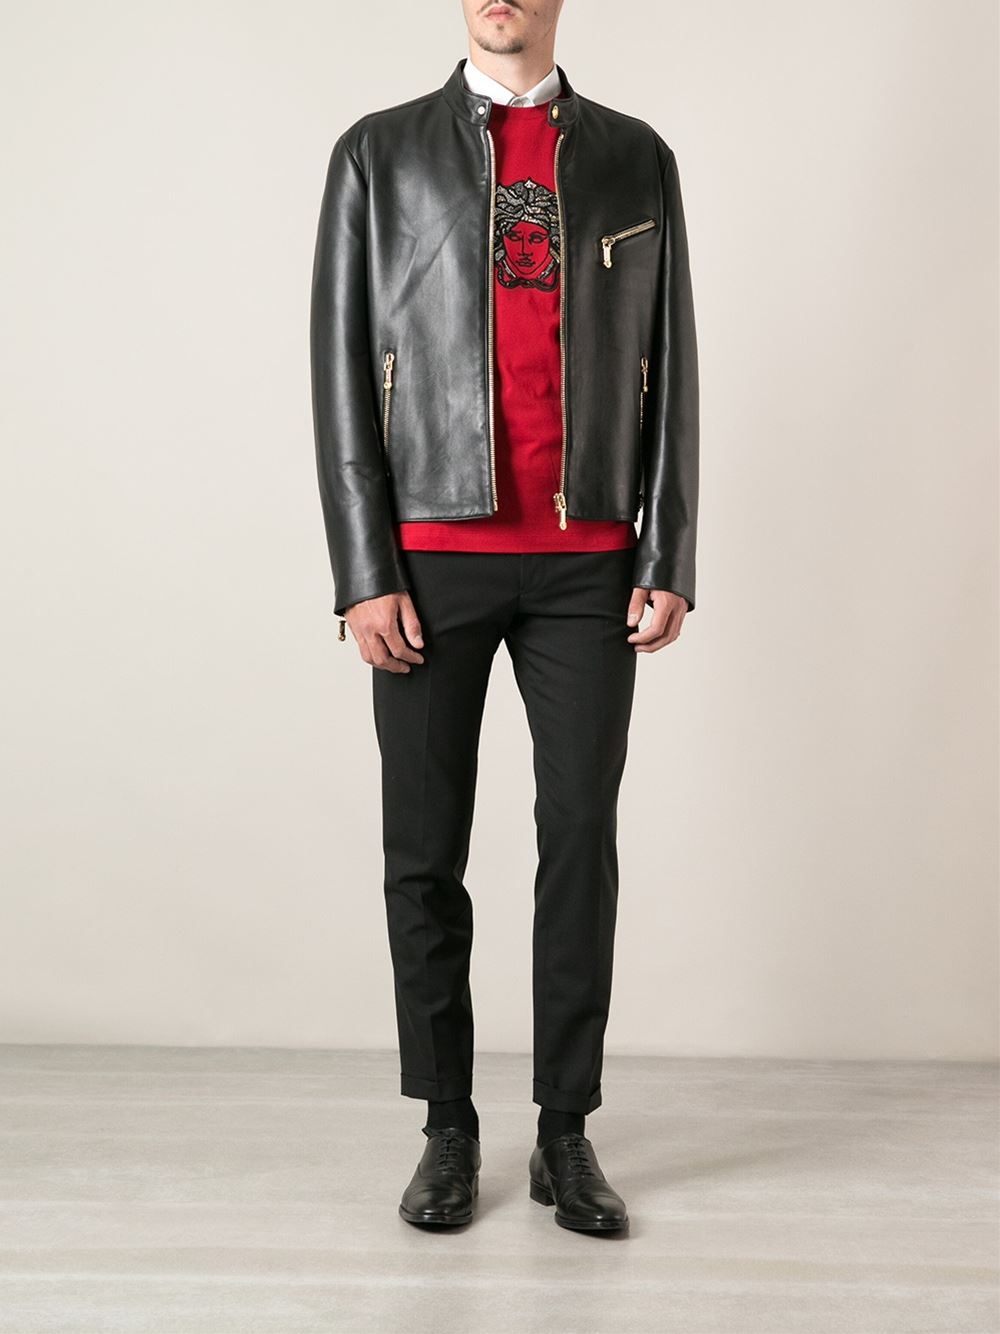 Versace Classic Leather Jacket in Black for Men - Lyst